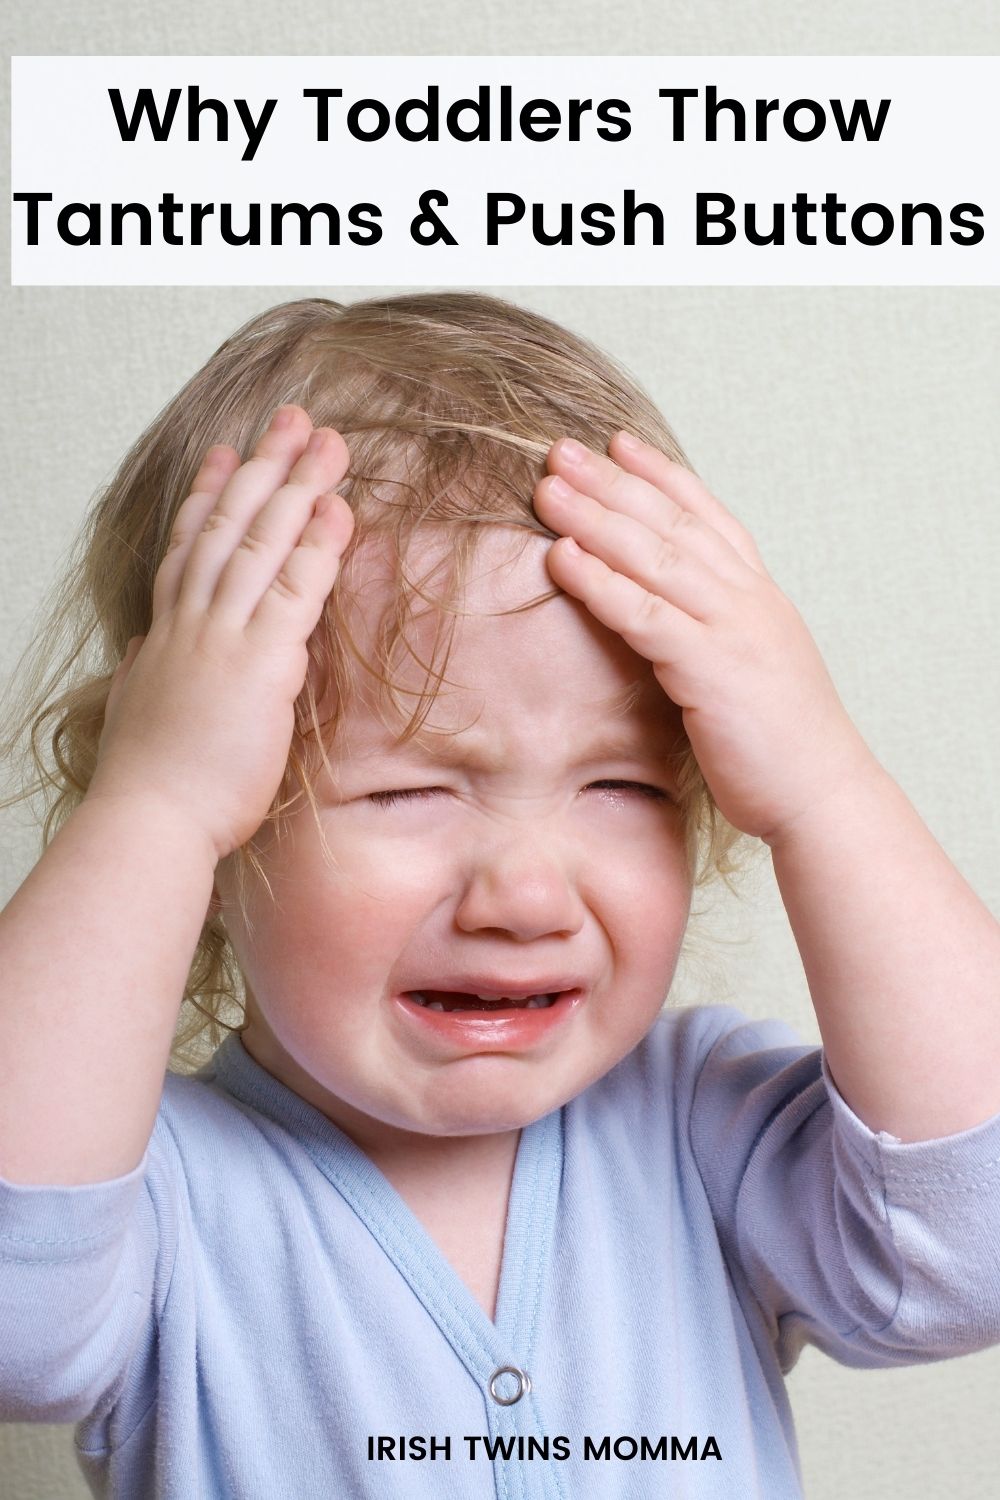 Why Toddlers Throw Tantrums and Push Buttons